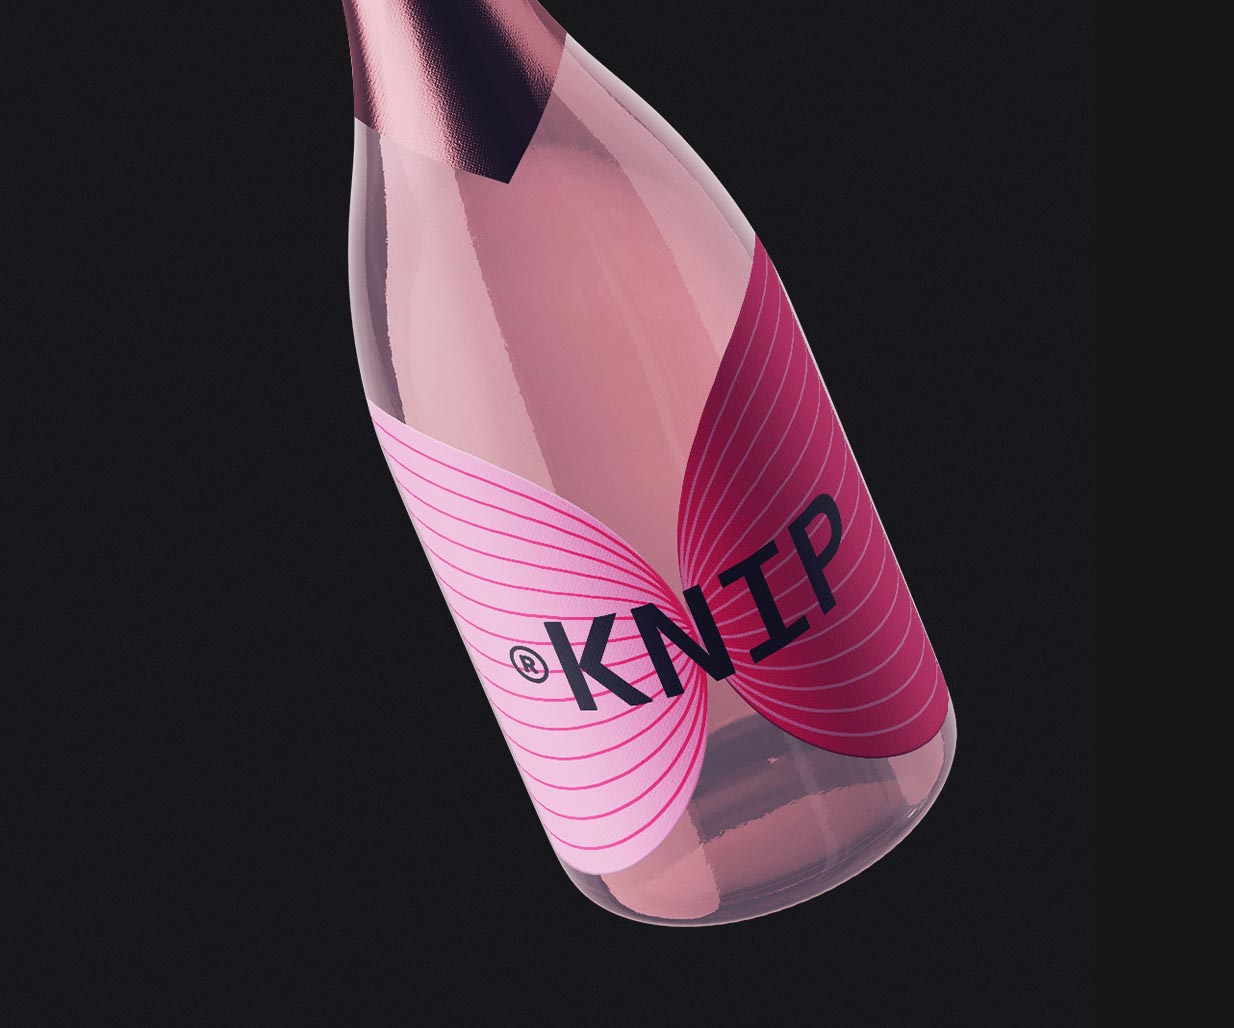 Branding agency, Percept, flips 'pink' to create KNIP in a branding and communication design project to help raise funds for charity to beat breast cancer, Image O